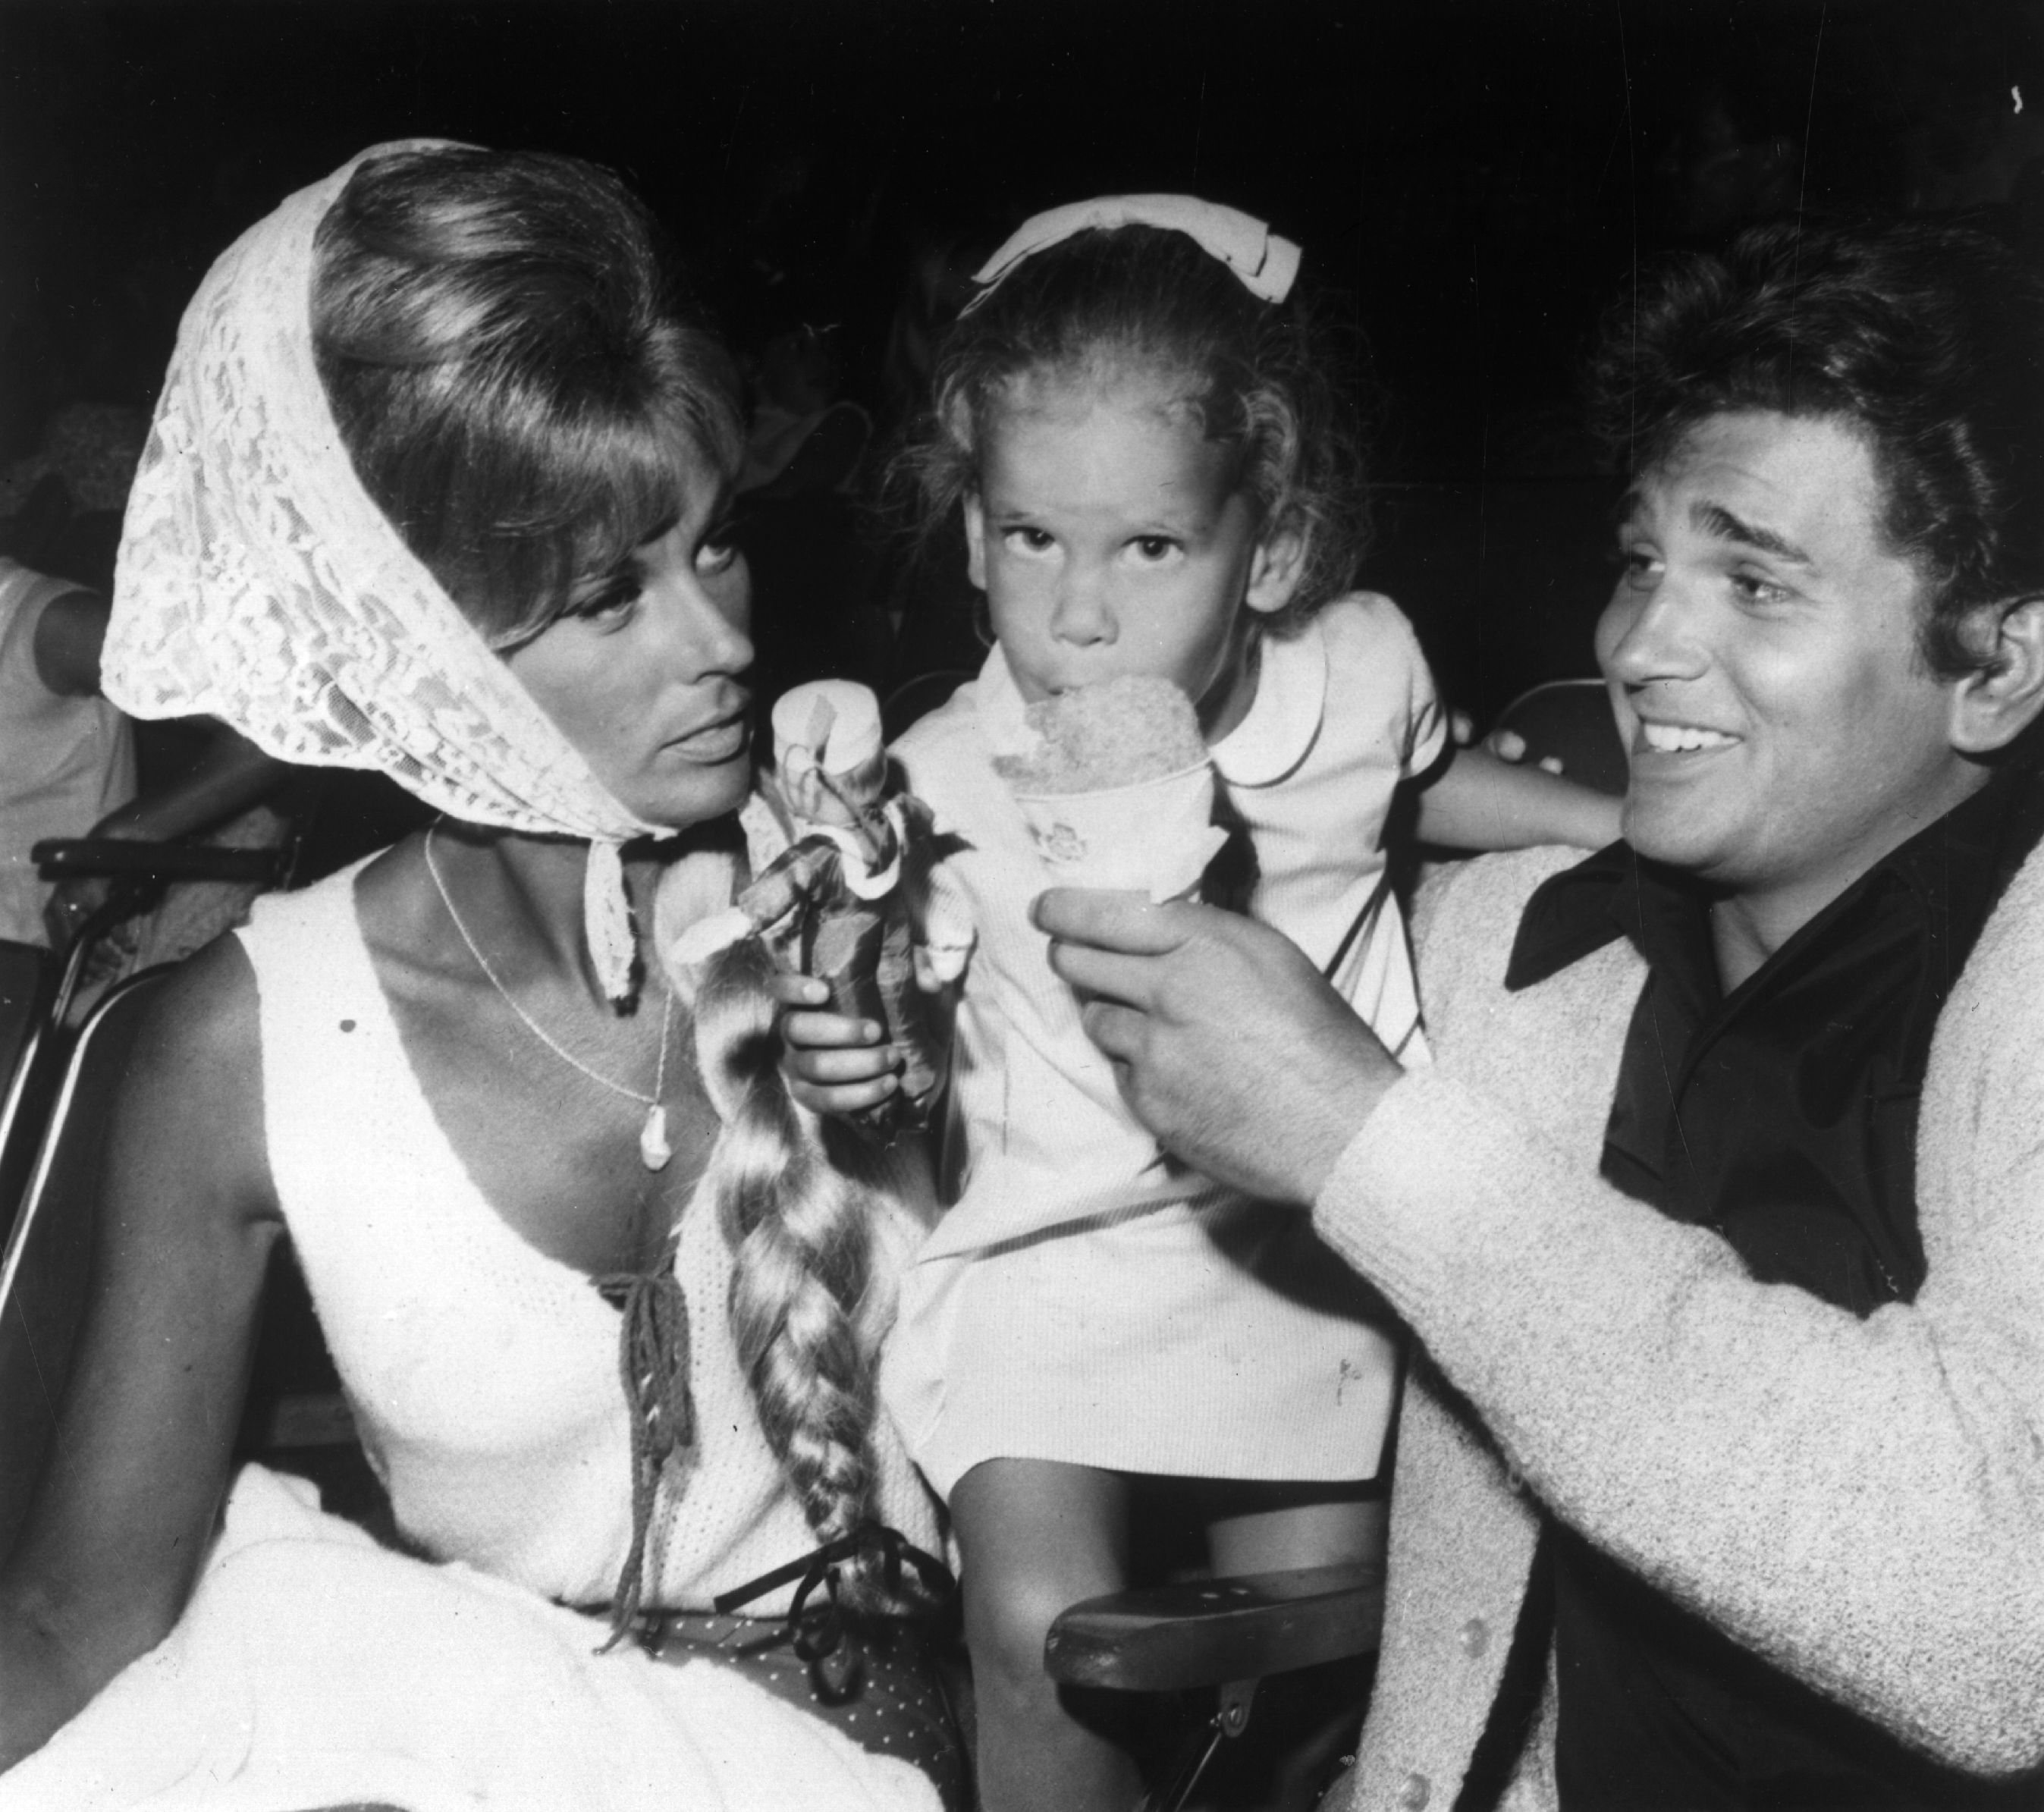 Michael Landon, who plays a leading role in the TV series 'Bonanza', with his wife Lynn and their young daughter, Cheryl in August 1965. | Source: Getty Images.